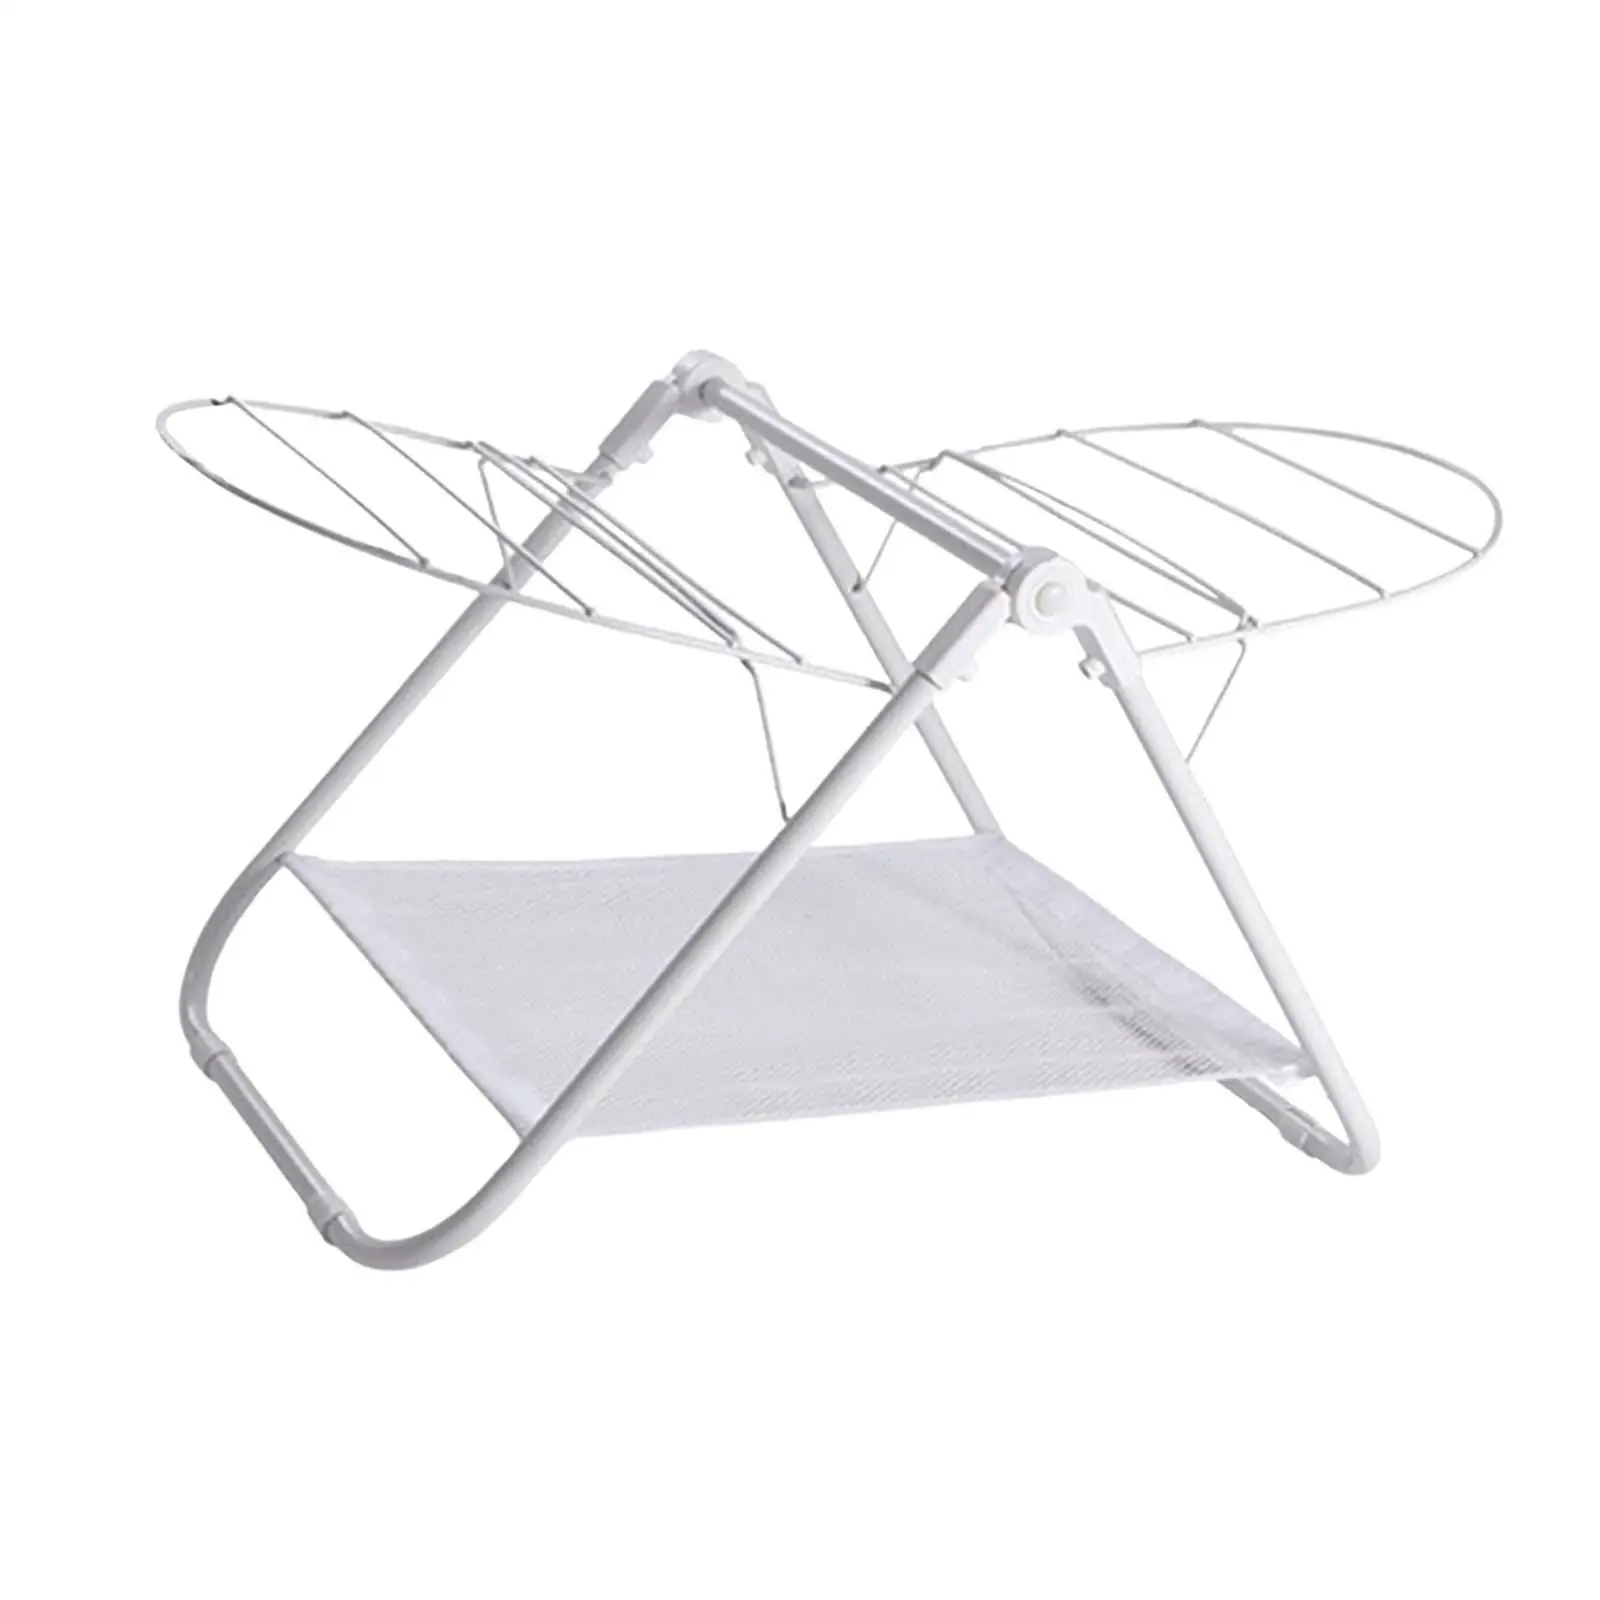 Collapsible Clothes Drying Rack Stainless Steel Durable Large Gullwing Drying Rack for Pillow Linens Towel Quilt Indoor Outdoor